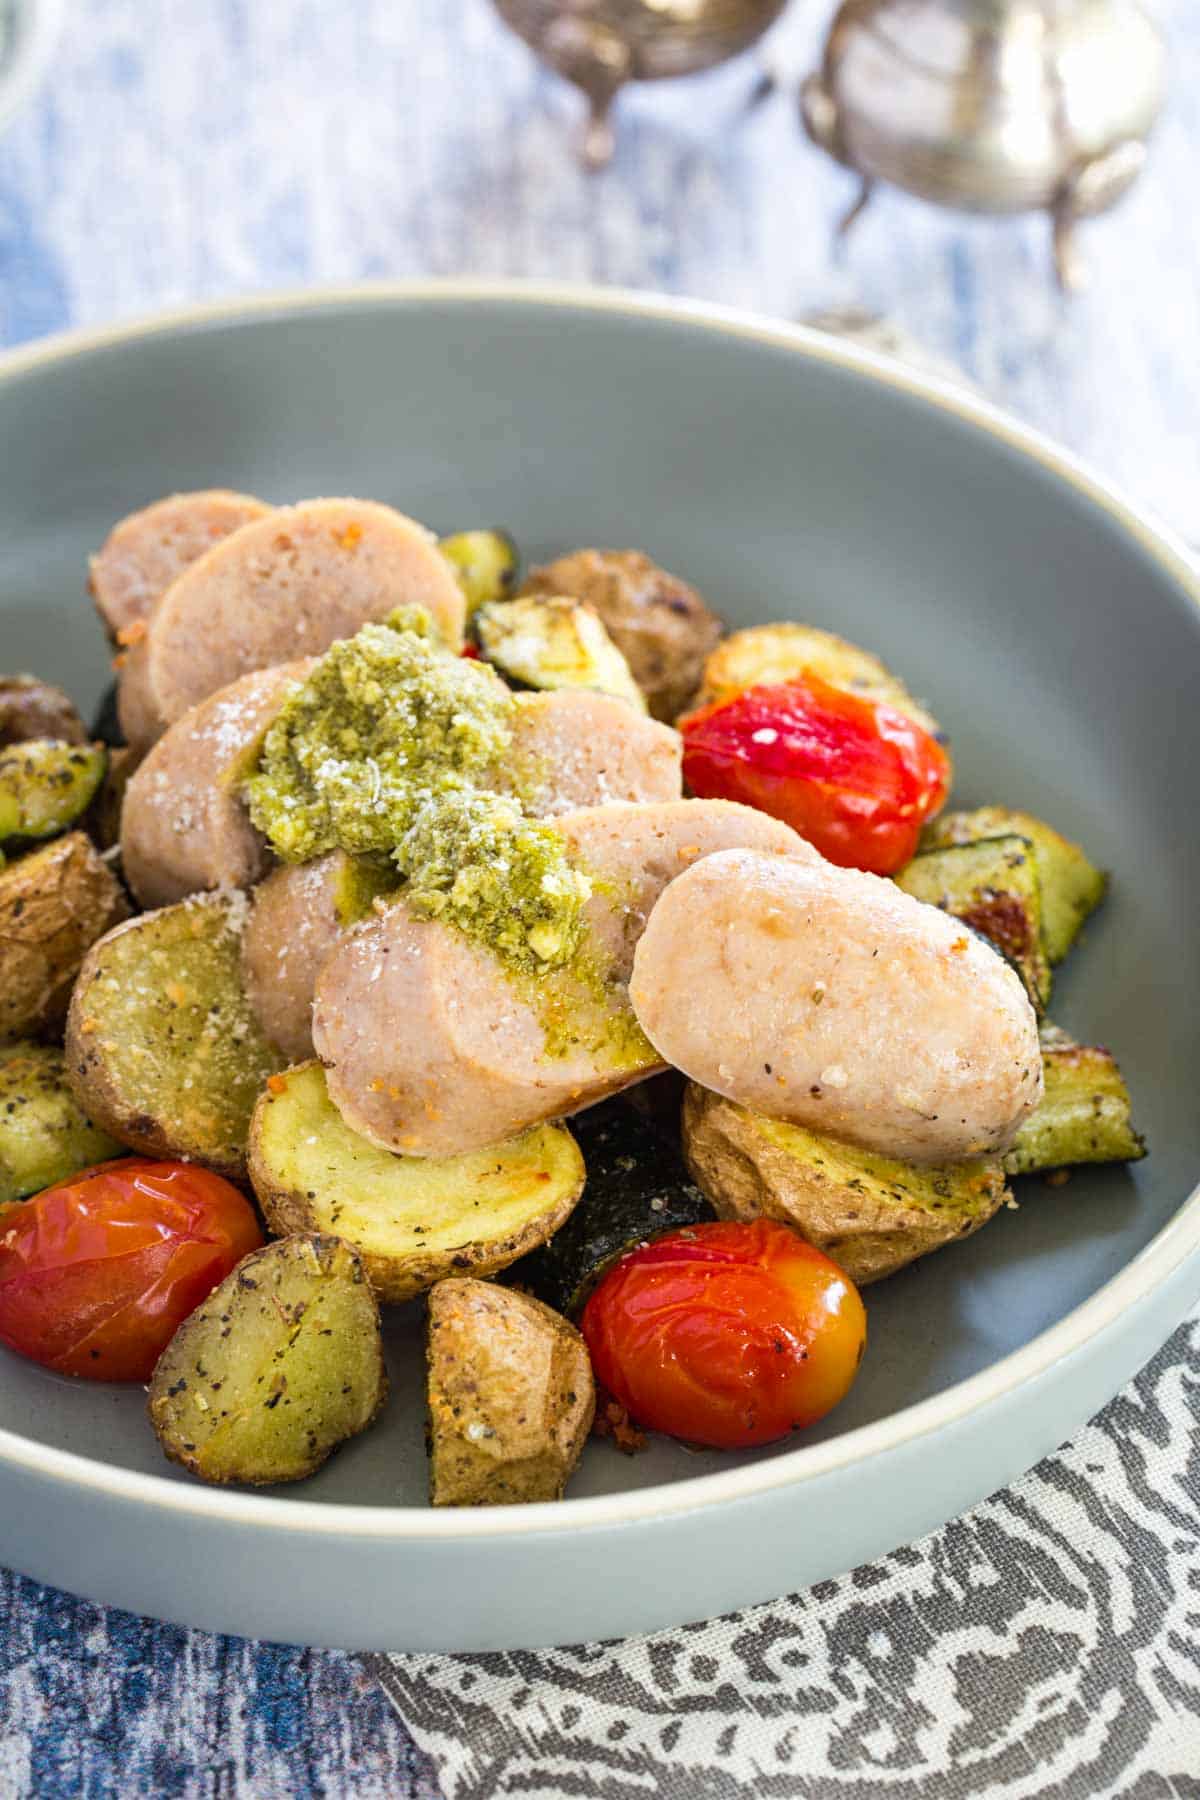 sliced sausage topped with pesto on top of roasted potatoes, zucchini, and tomatoes in a shallow pale blue bowl